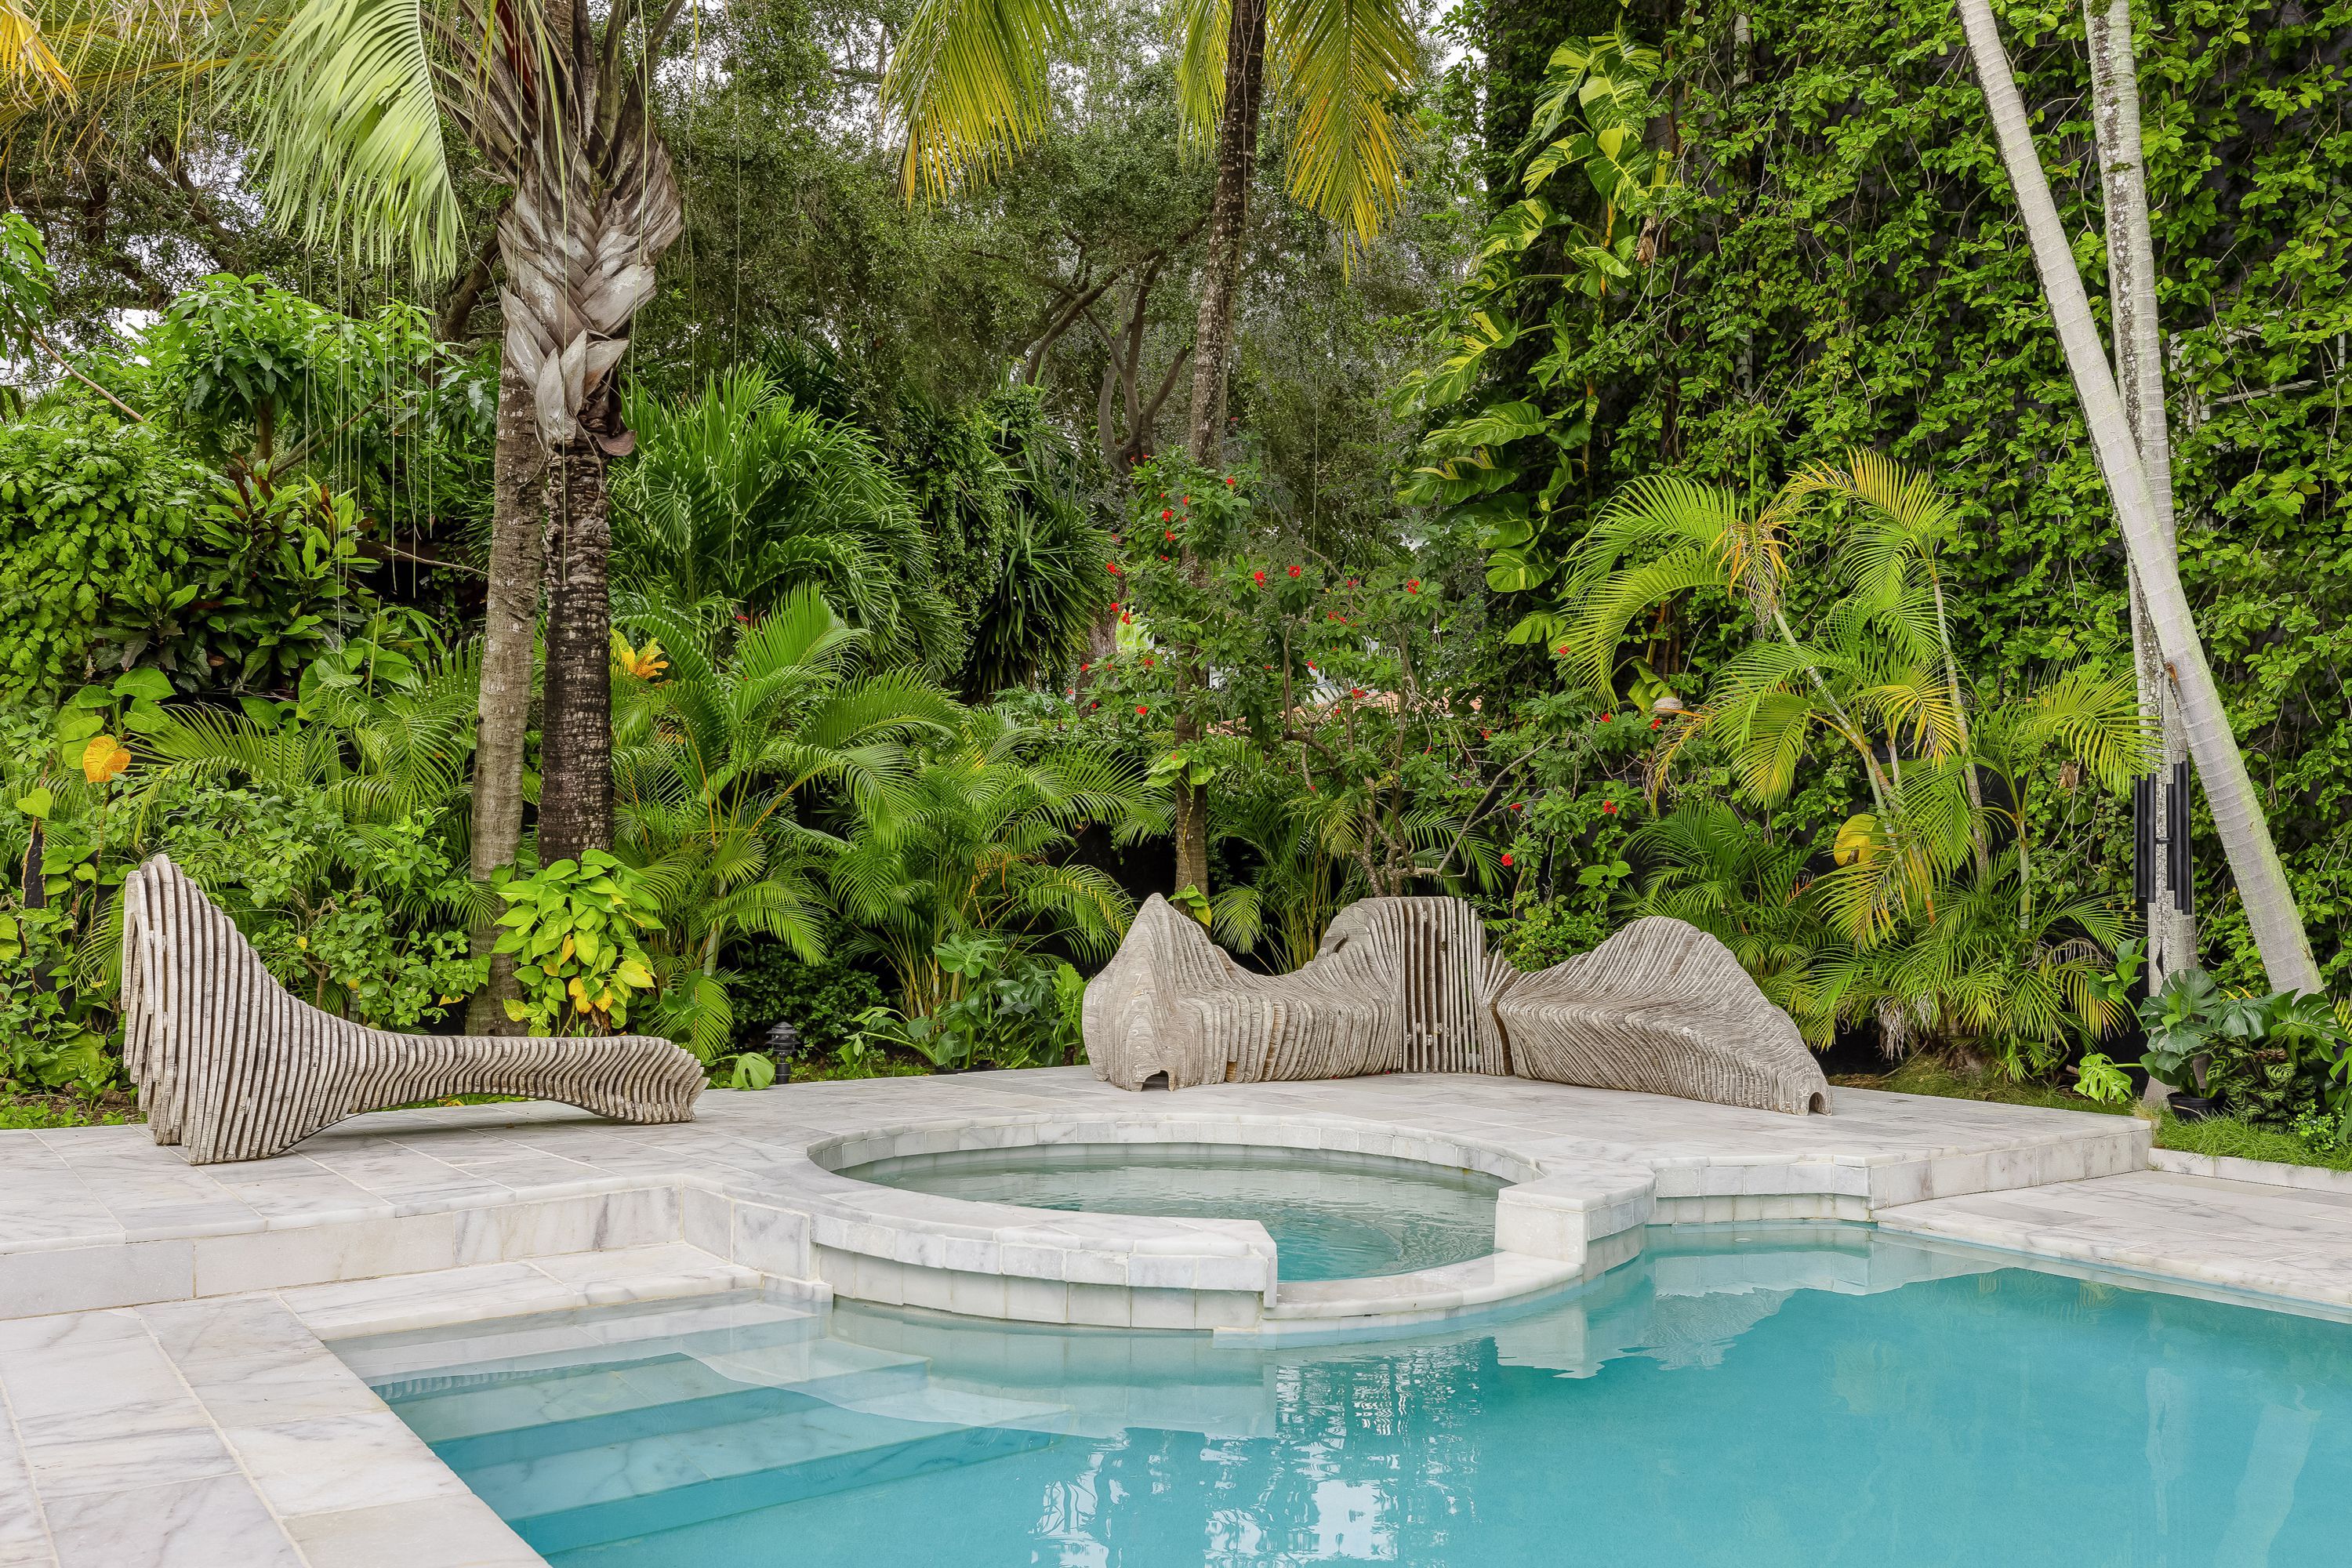 Backyard pool surrounded by tropical plants.